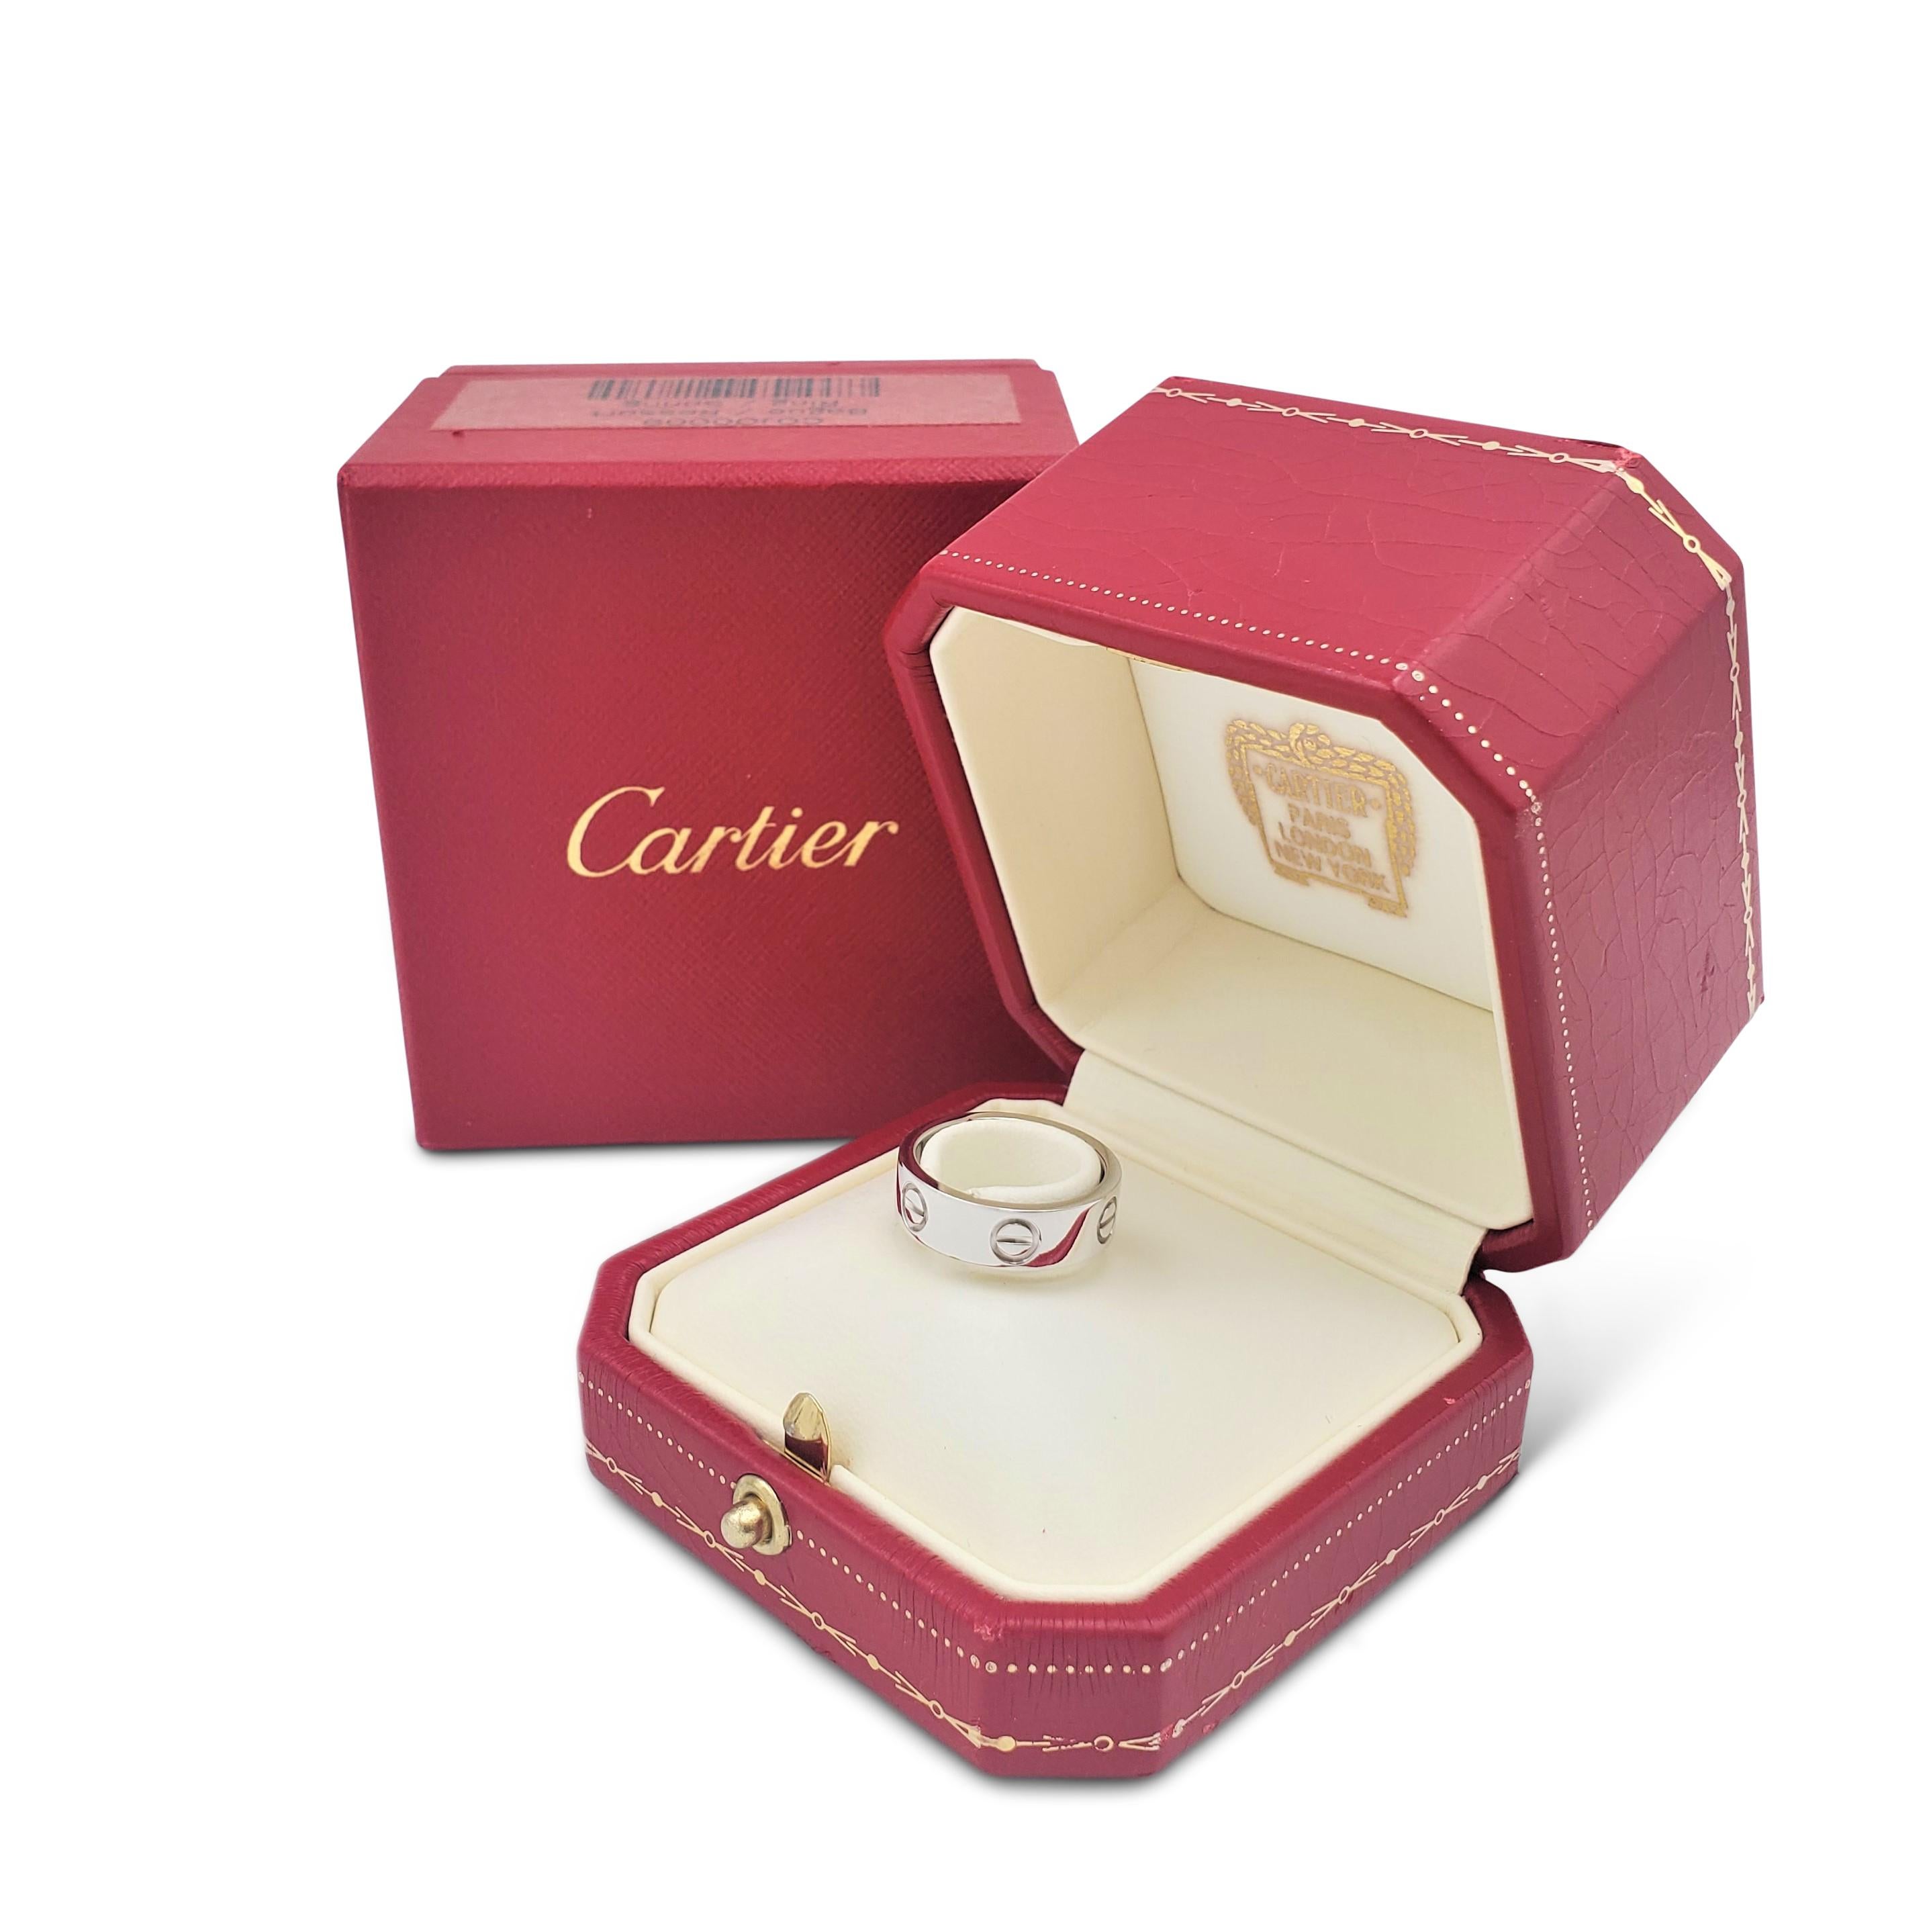 Cartier 'Love' White Gold Ring 2